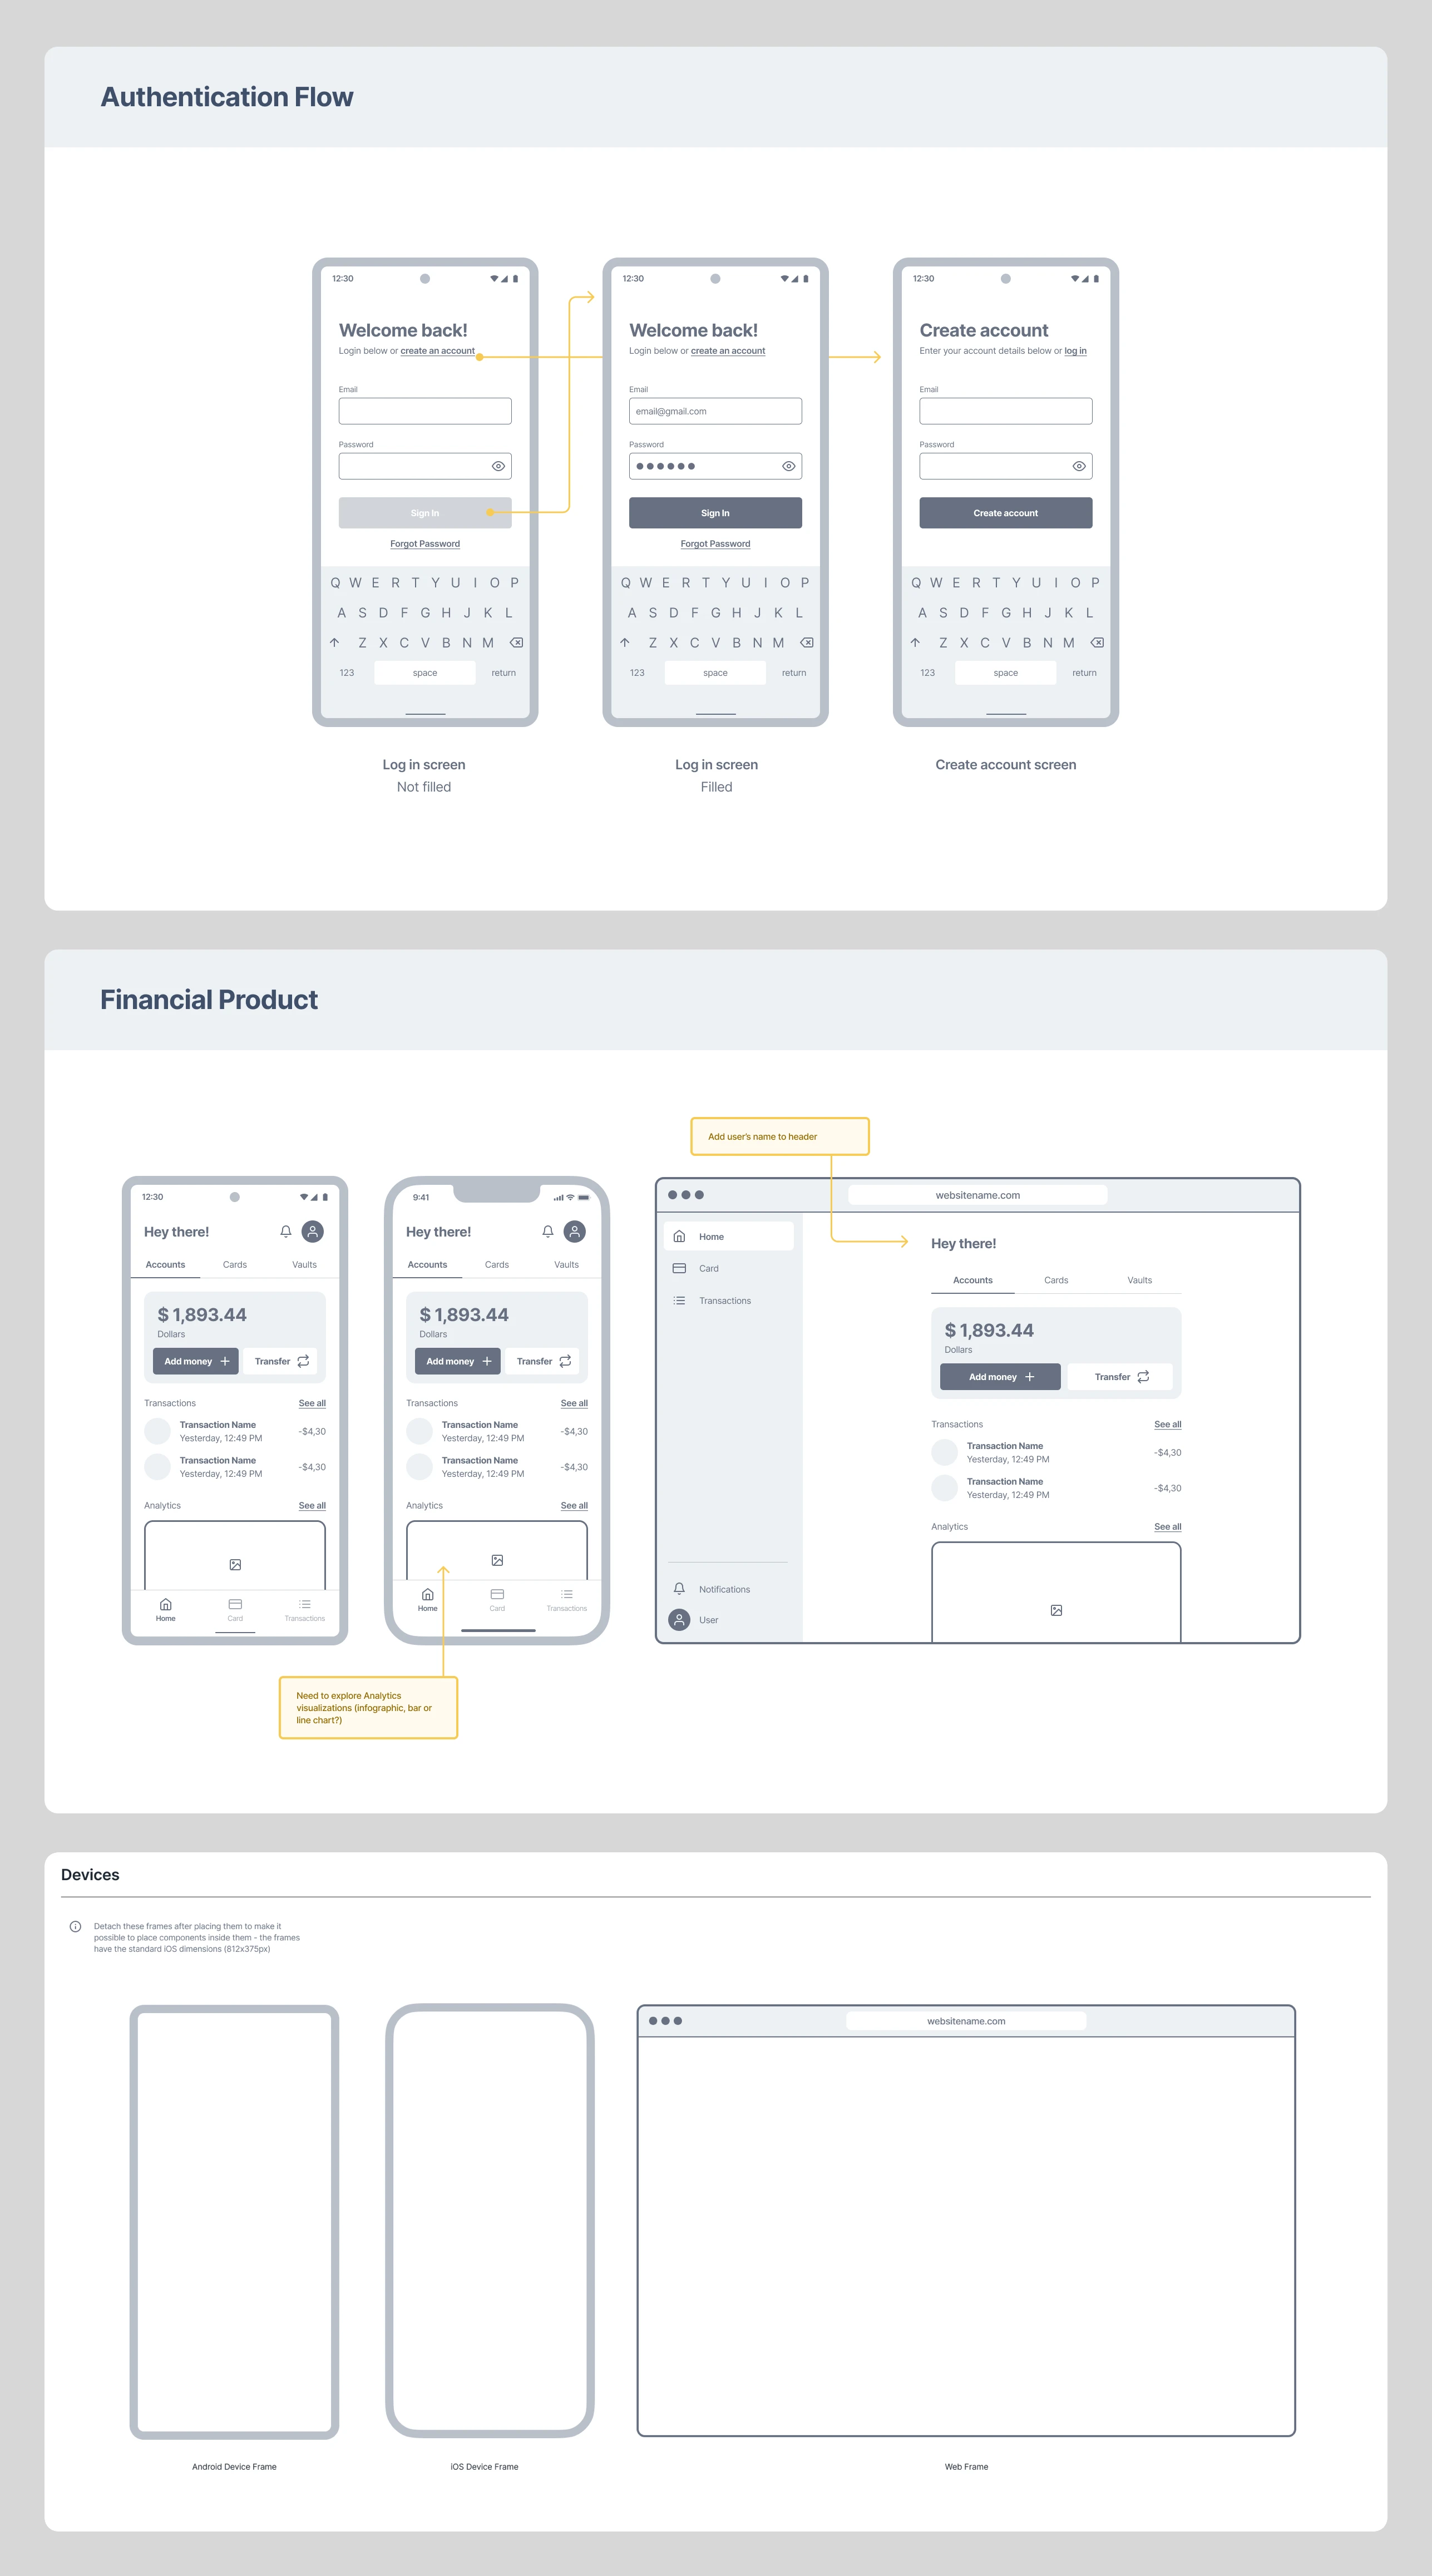 Free Wireframing Kit for Figma - Free wireframe kit to help someone create faster low fidelity wireframe. Feel free to reuse, iterate, completely mess up, or even create your own kit based on this one!